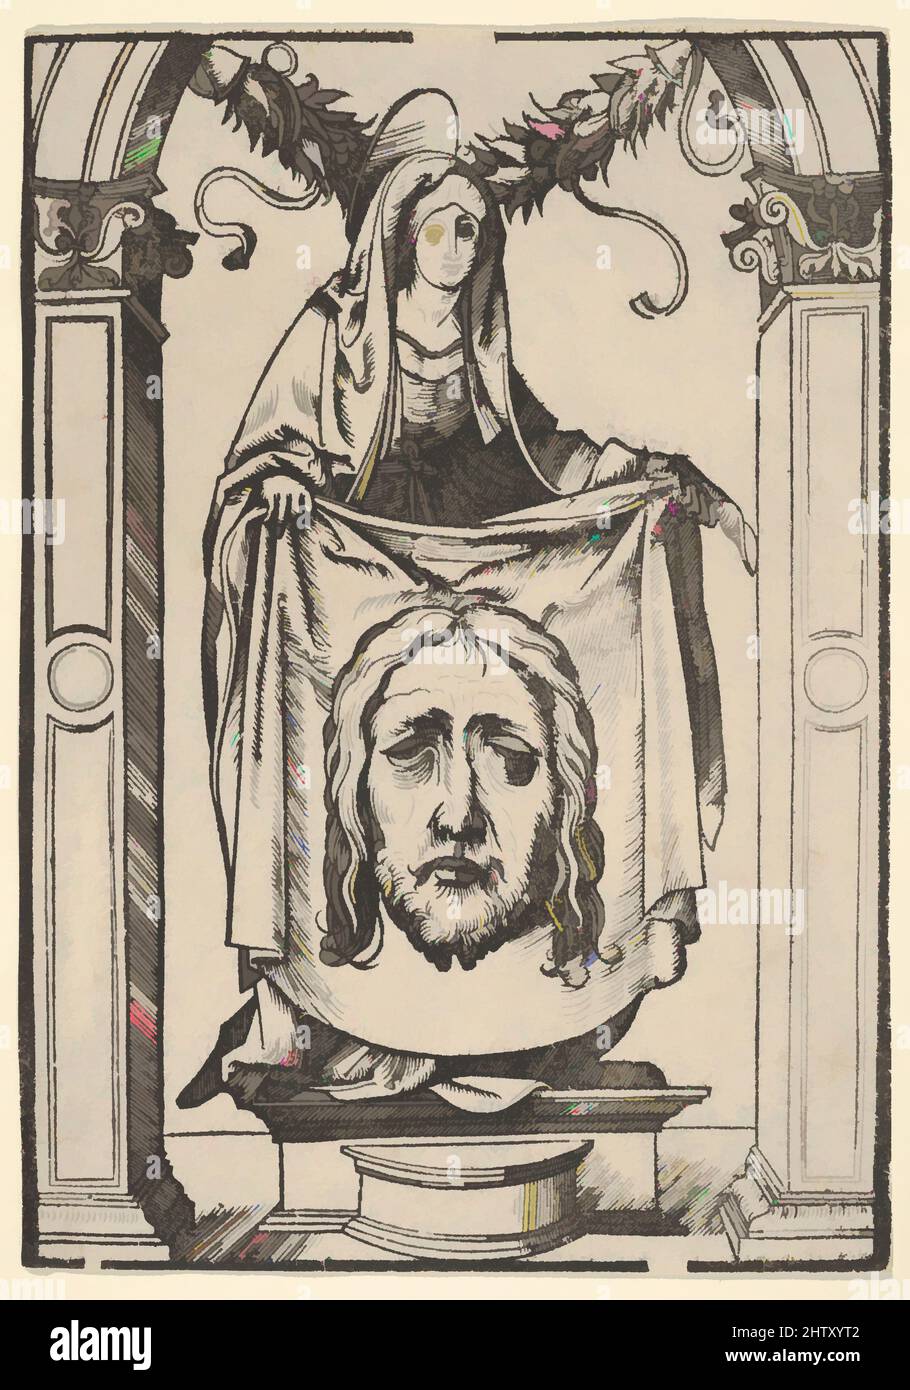 Art inspired by The Sudarium of Saint Veronica, Woodcut, Sheet: 7 3/4 × 5 3/8 in. (19.7 × 13.7 cm), Prints, Hans Burgkmair (German, Augsburg 1473–1531 Augsburg, Classic works modernized by Artotop with a splash of modernity. Shapes, color and value, eye-catching visual impact on art. Emotions through freedom of artworks in a contemporary way. A timeless message pursuing a wildly creative new direction. Artists turning to the digital medium and creating the Artotop NFT Stock Photo